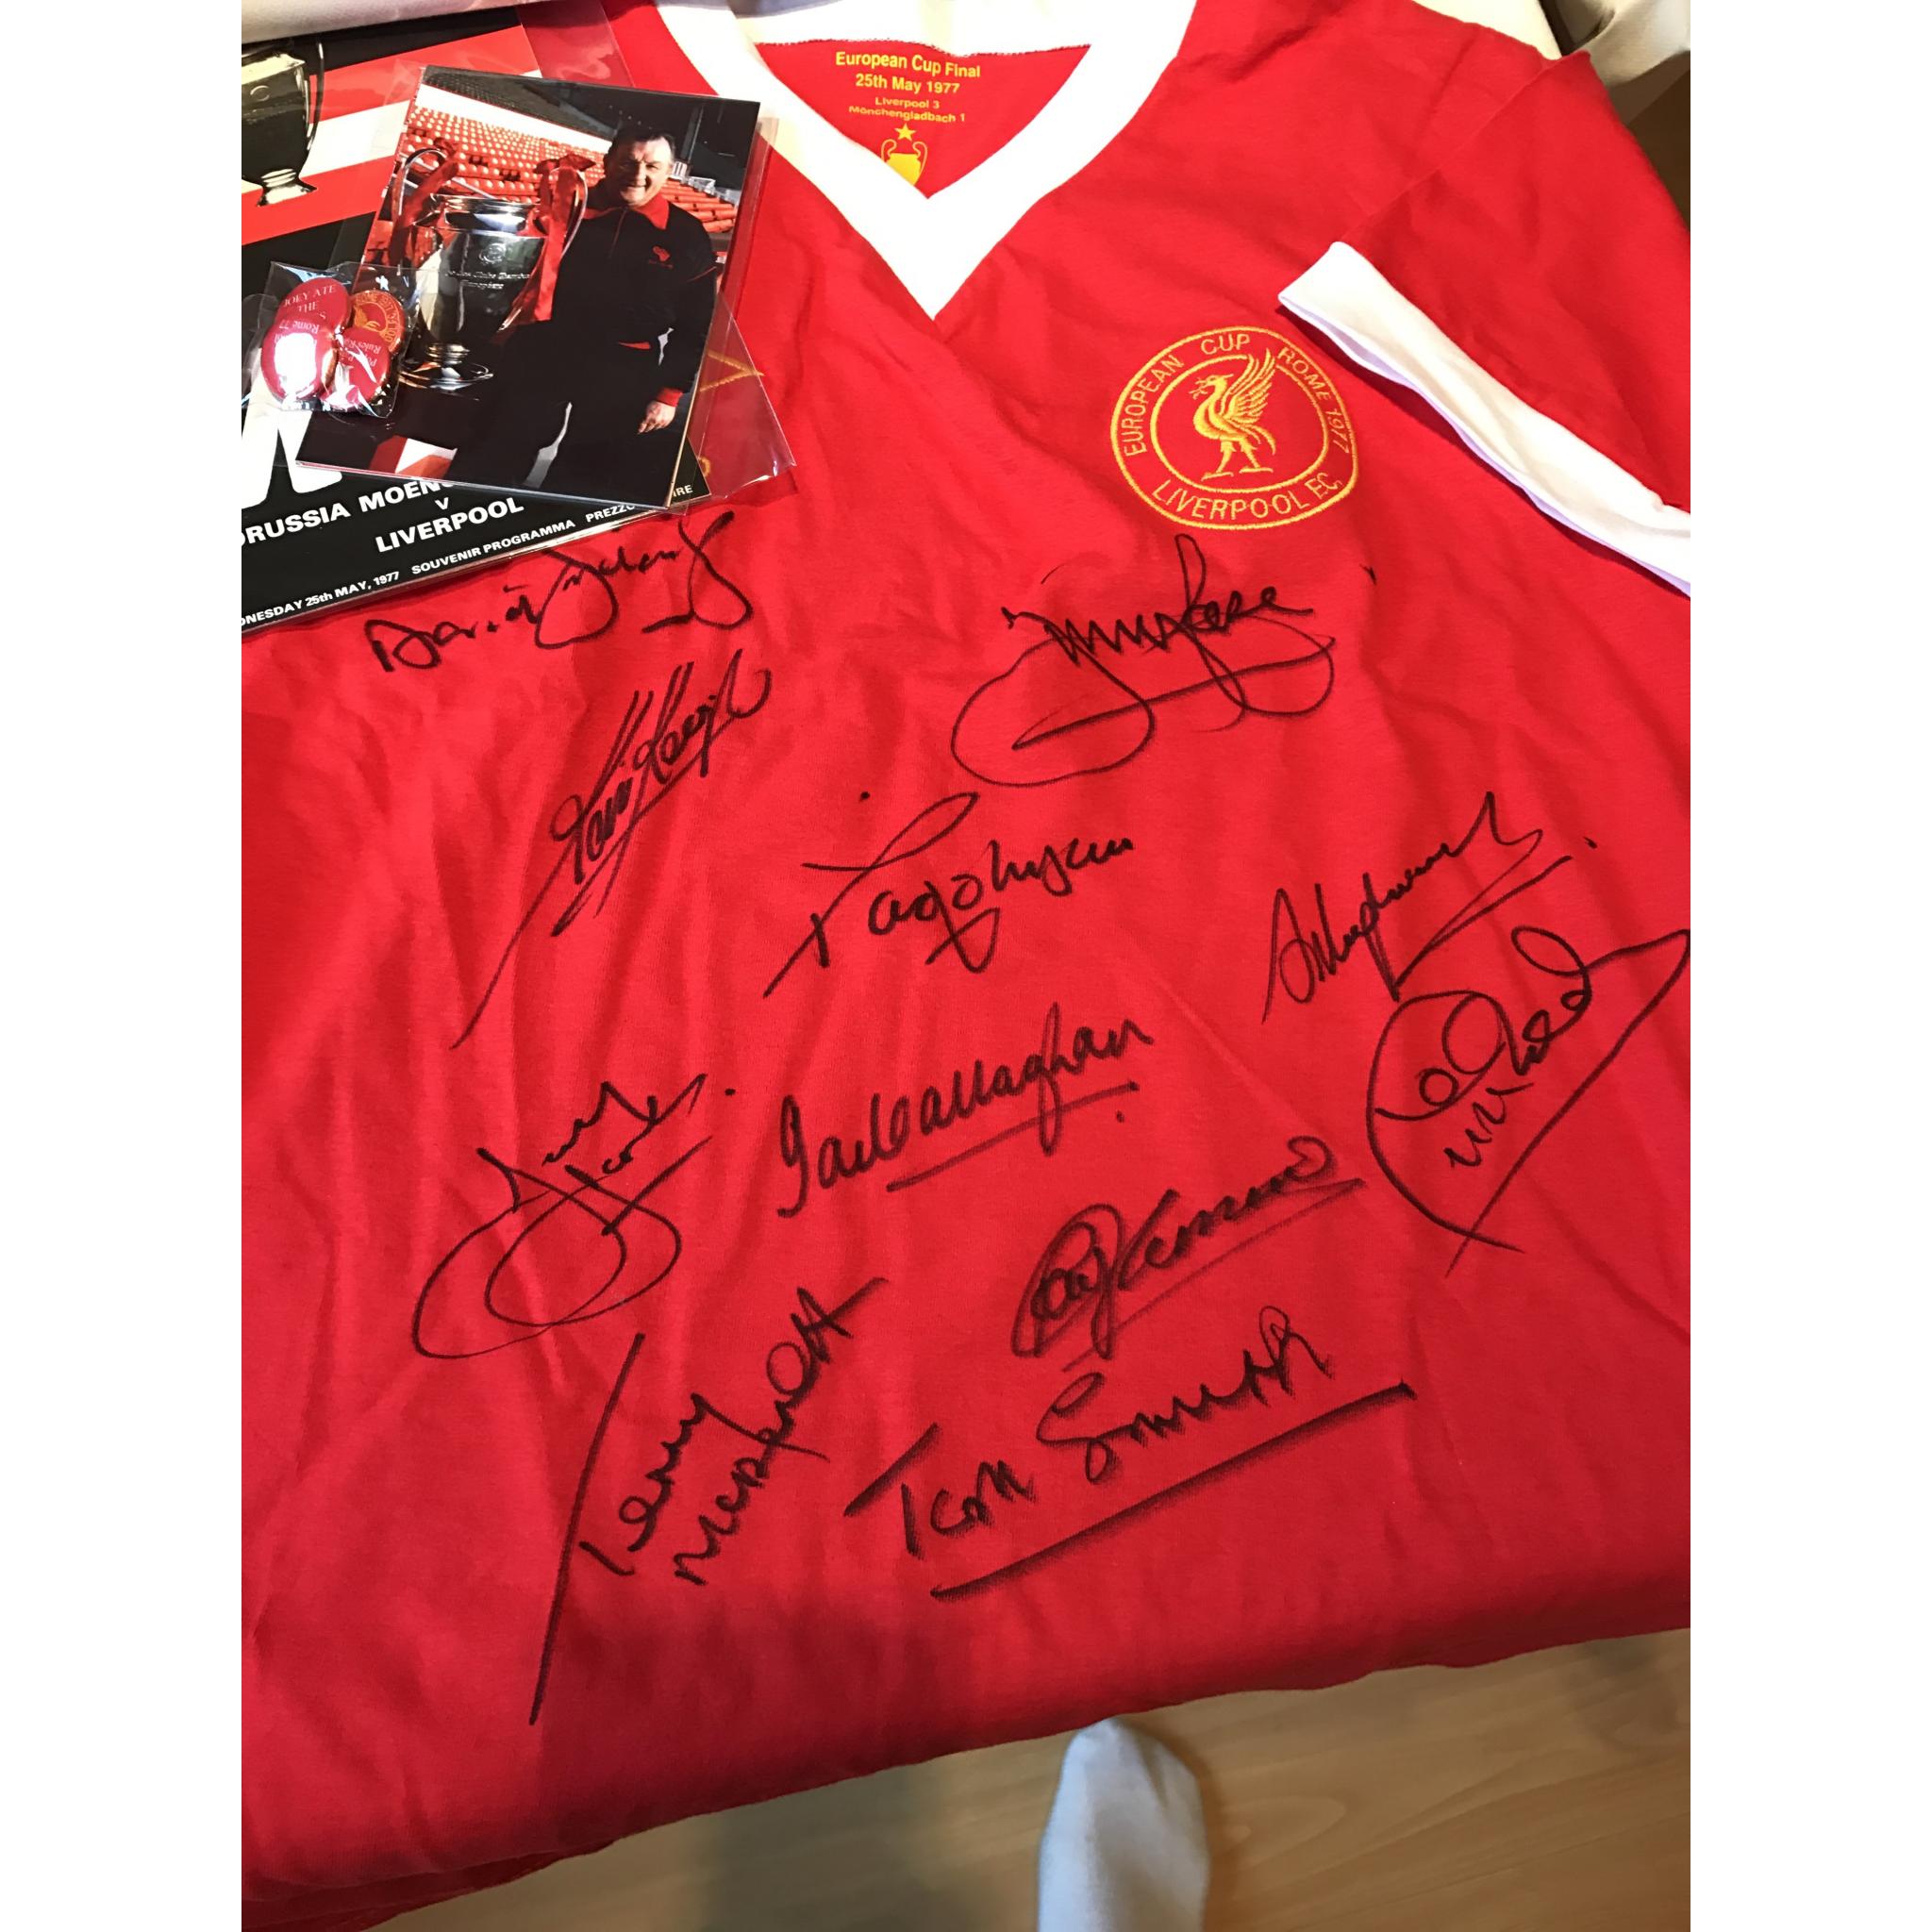 1977 EUROPEAN CUP LIVERPOOL MULTI SIGNED BY 10 FOOTBALL SHIRT WITH COA PROOF 